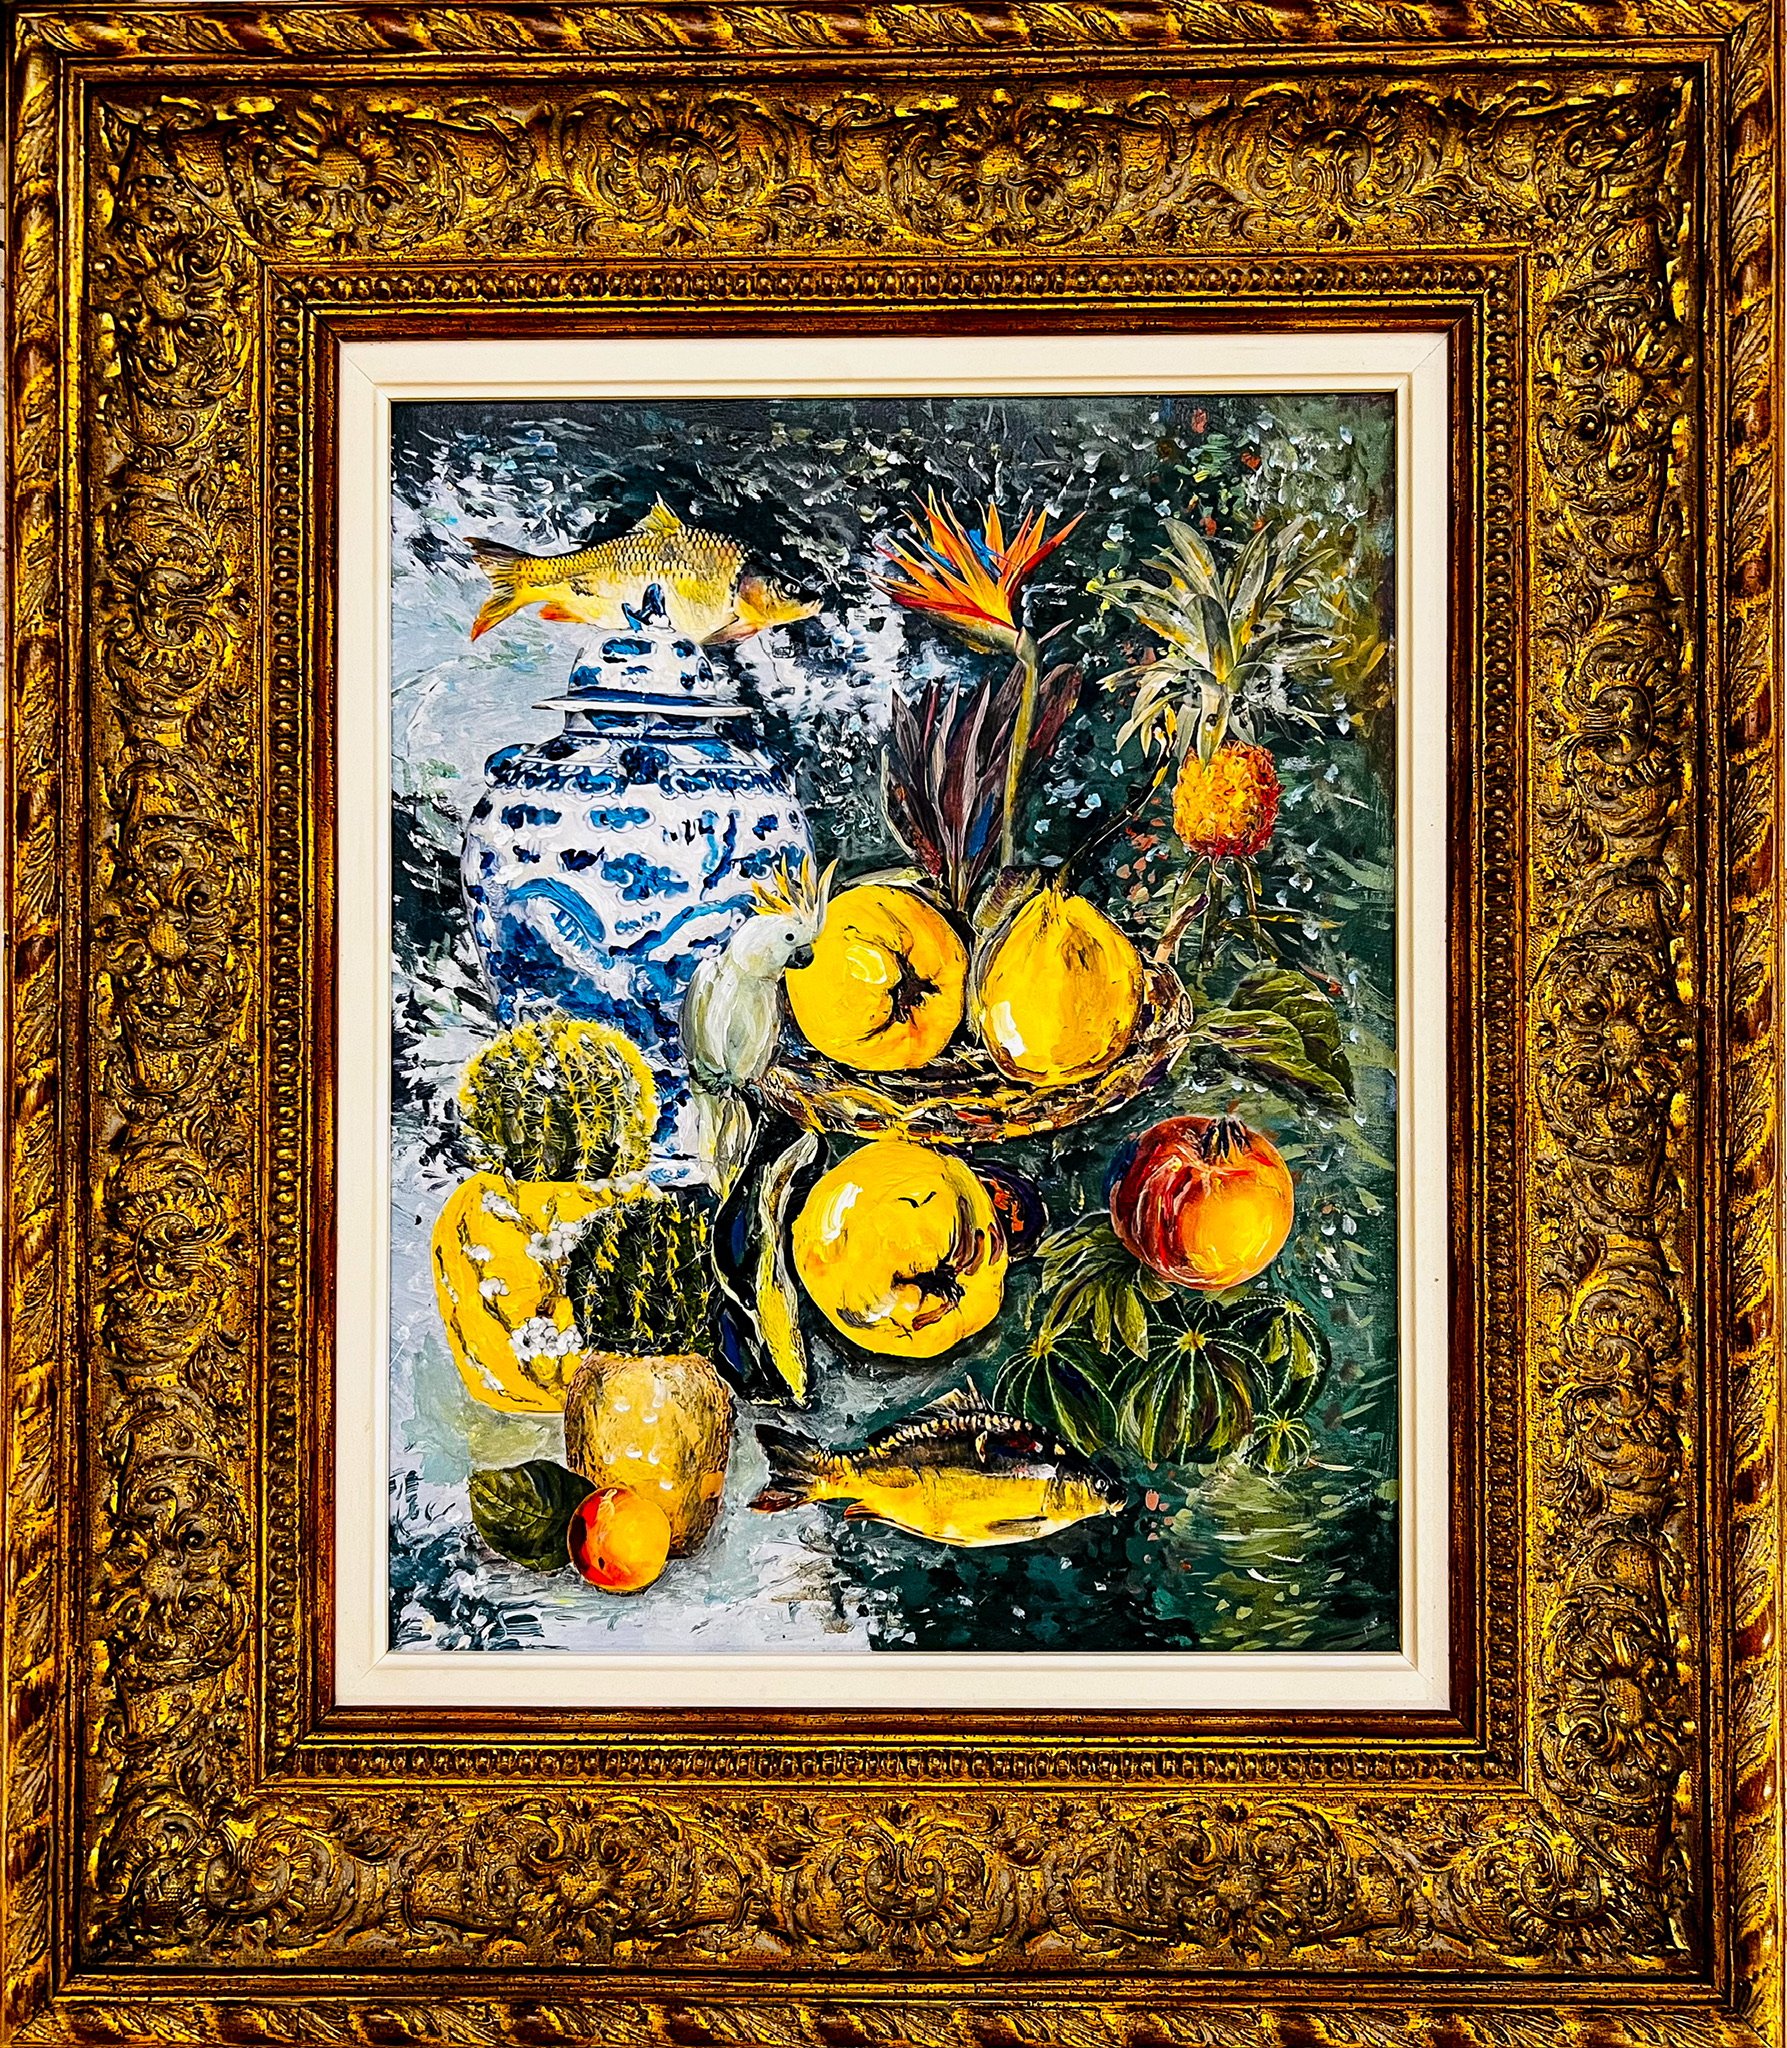 Tropical Still Life with Parrot & Fish 2022 Acryl Mixed Media on Canvas 50x40cm €2500 SOLD.JPG